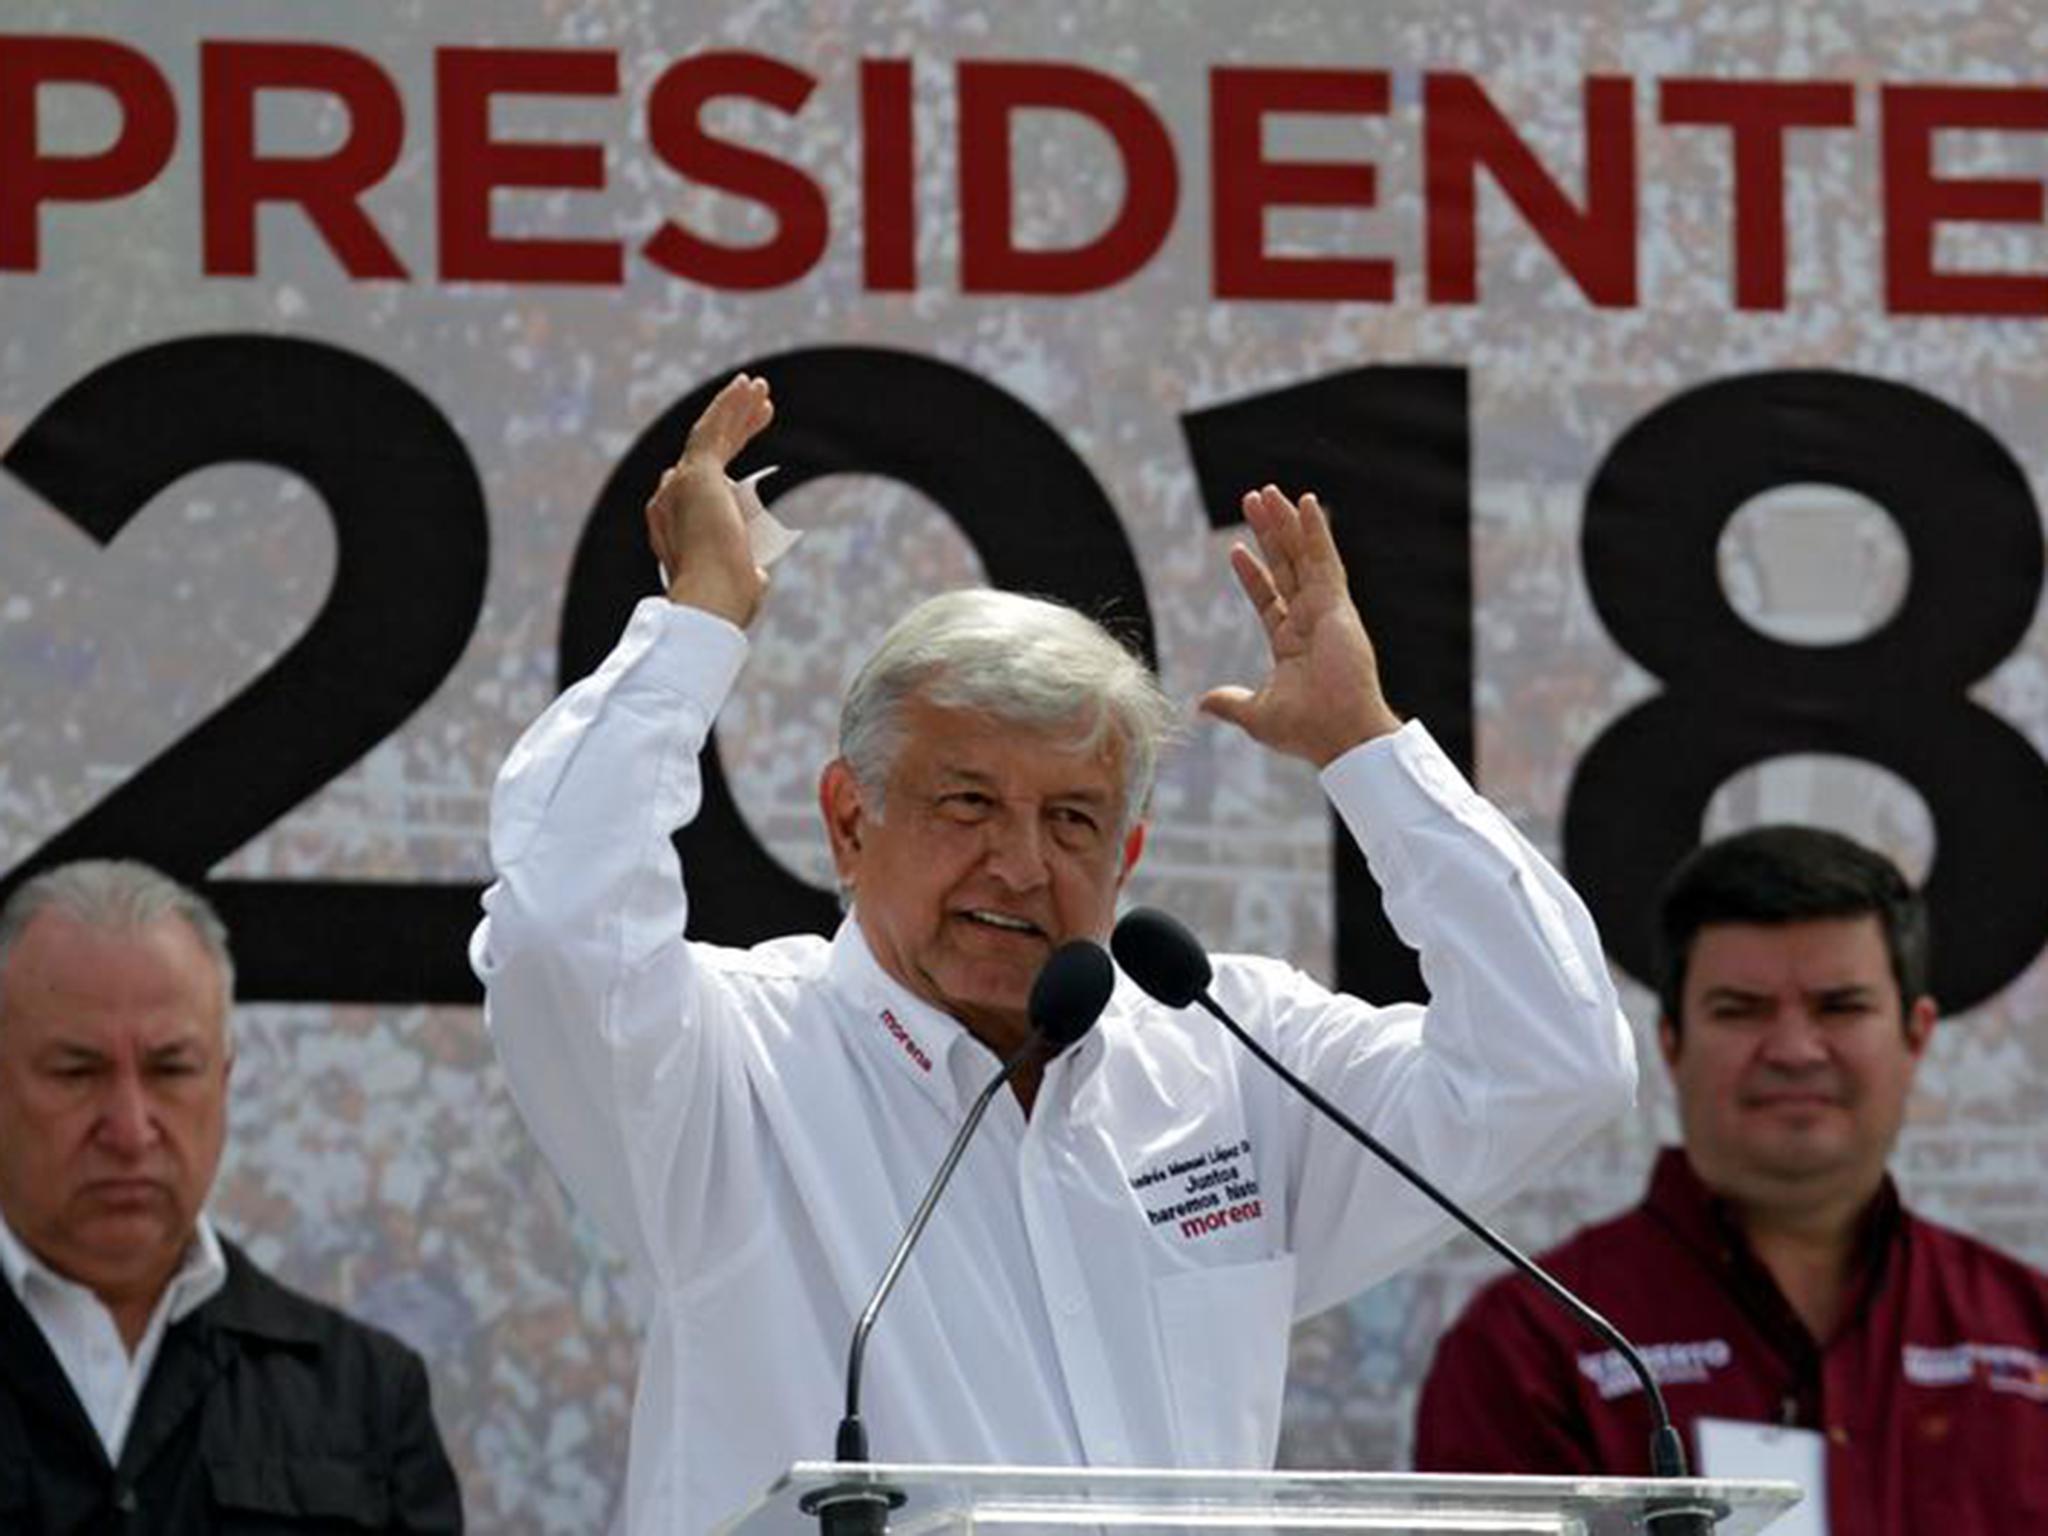 Andres Manuel Lopez Obrador has said his nation should reduce its economic dependence on foreign powers